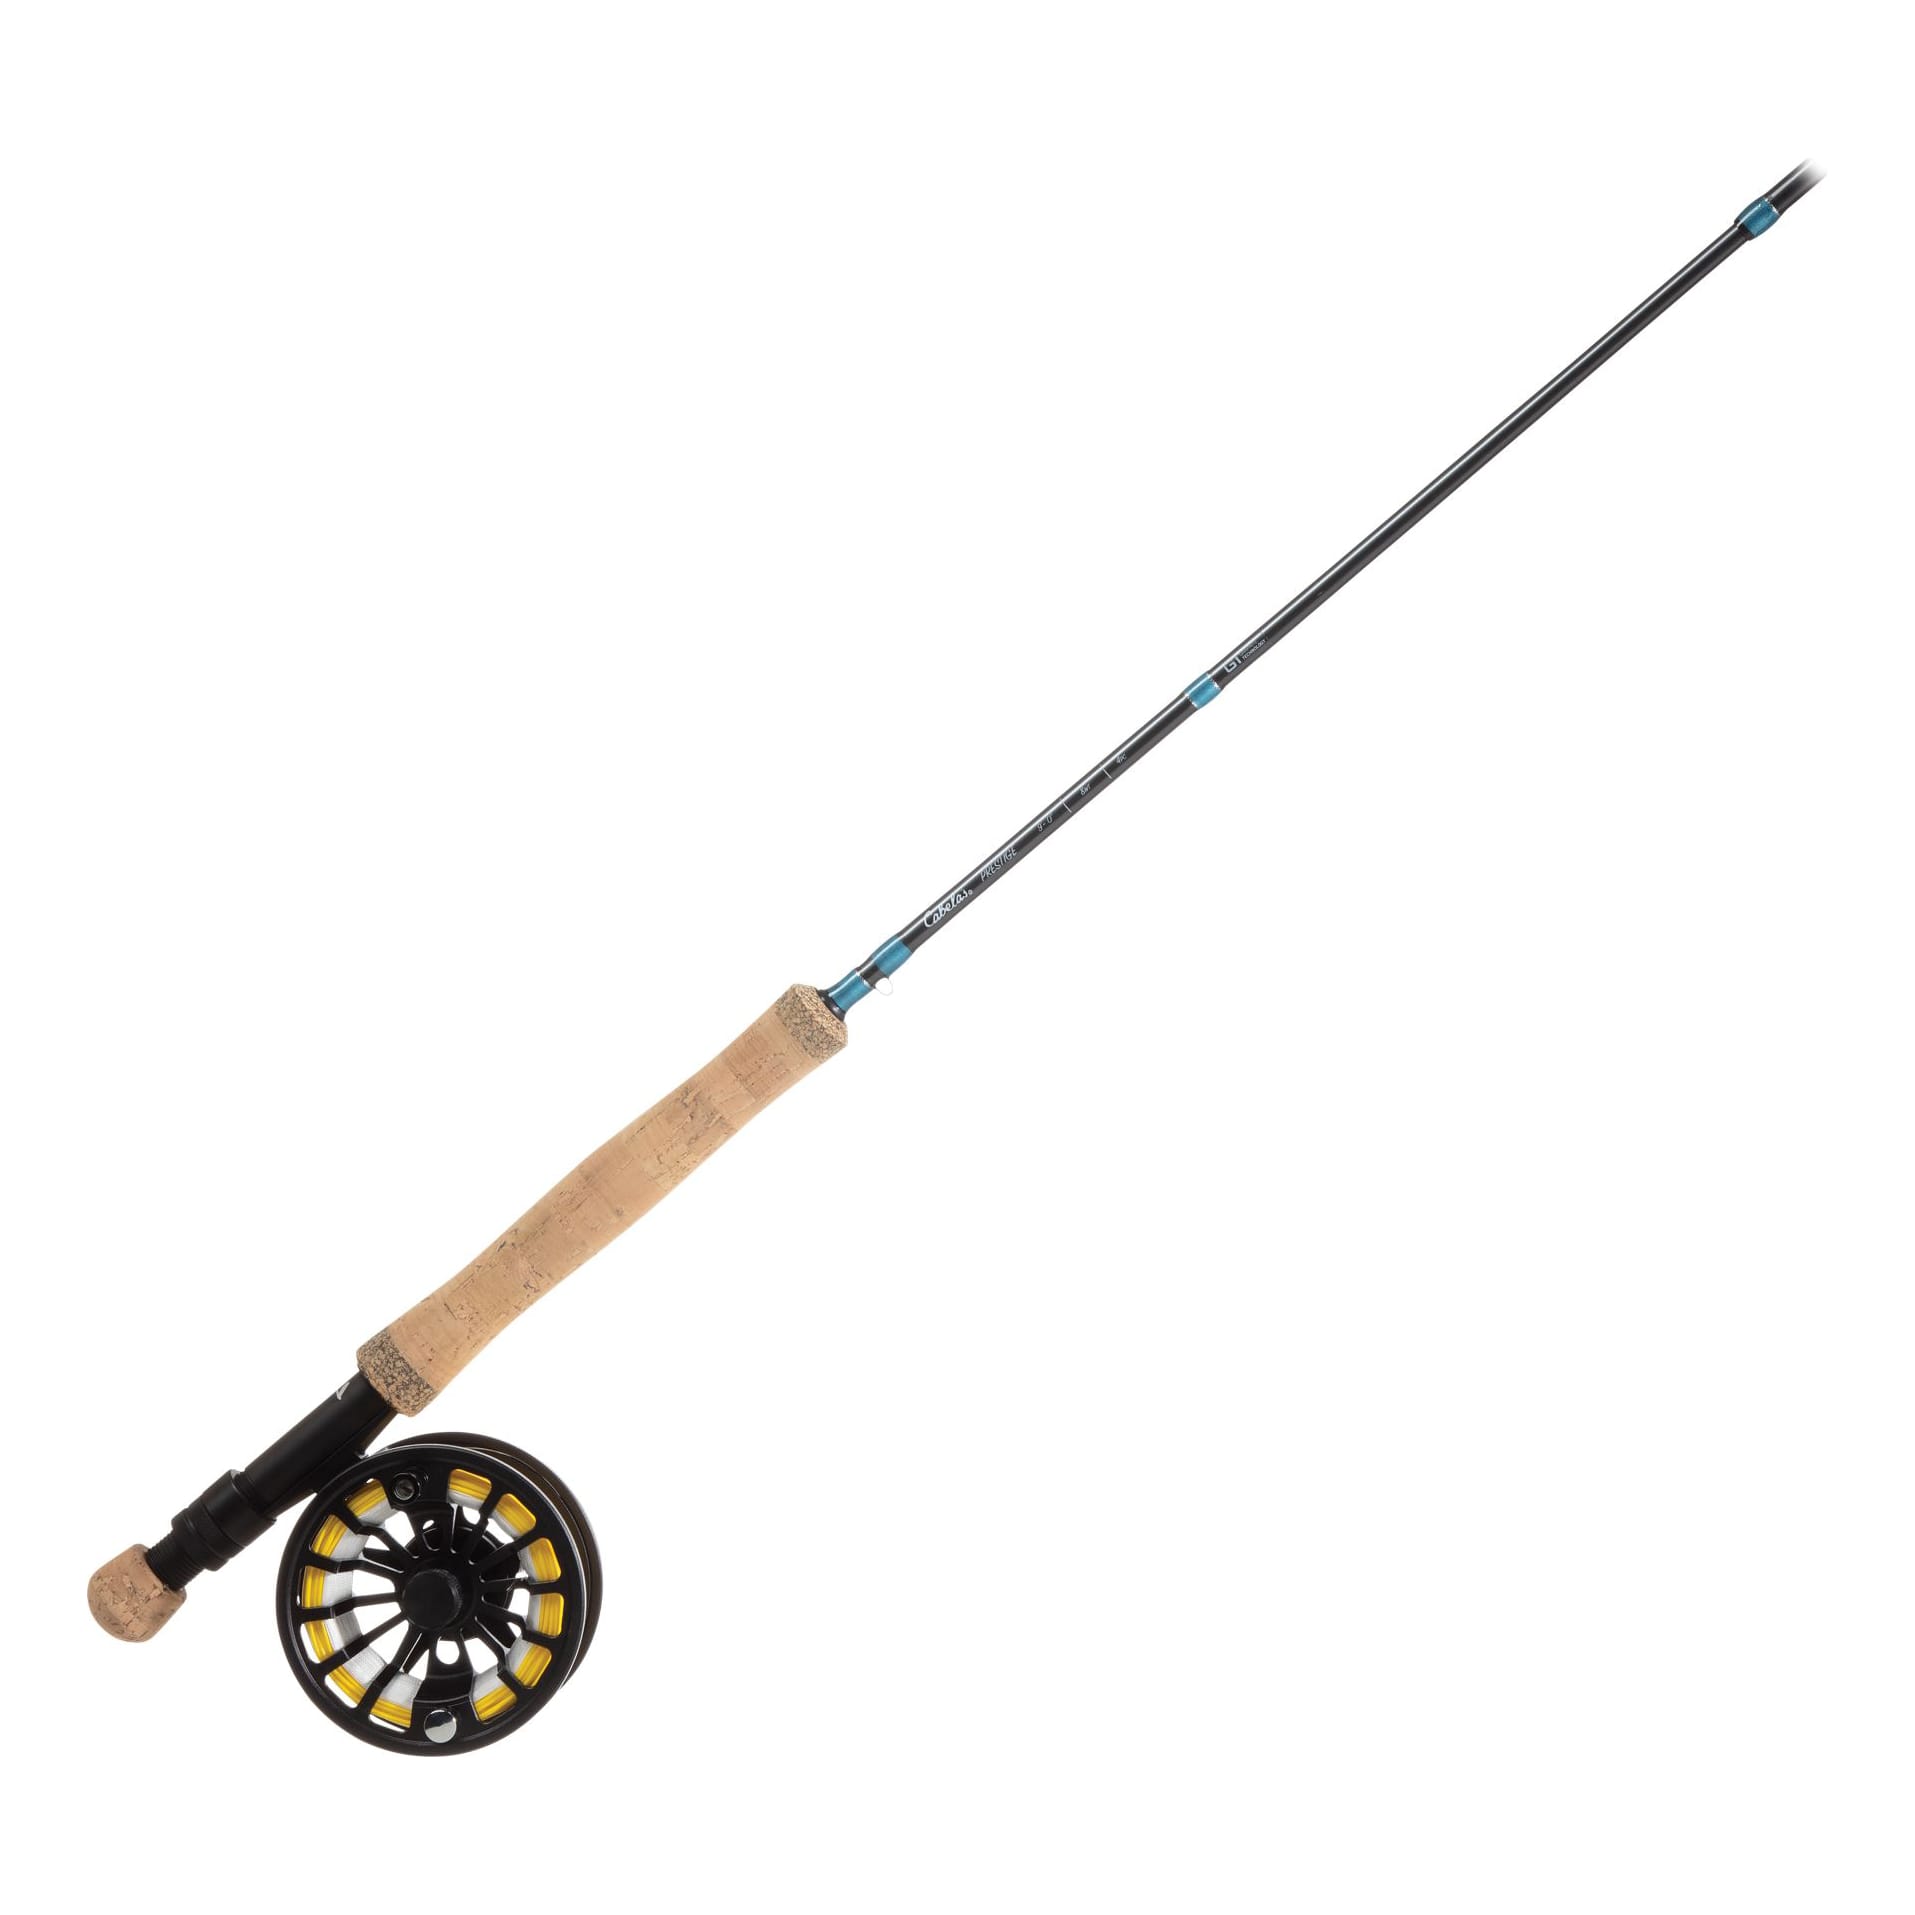 Cabela's Prestige Fly Outfit - Rod and Reel View